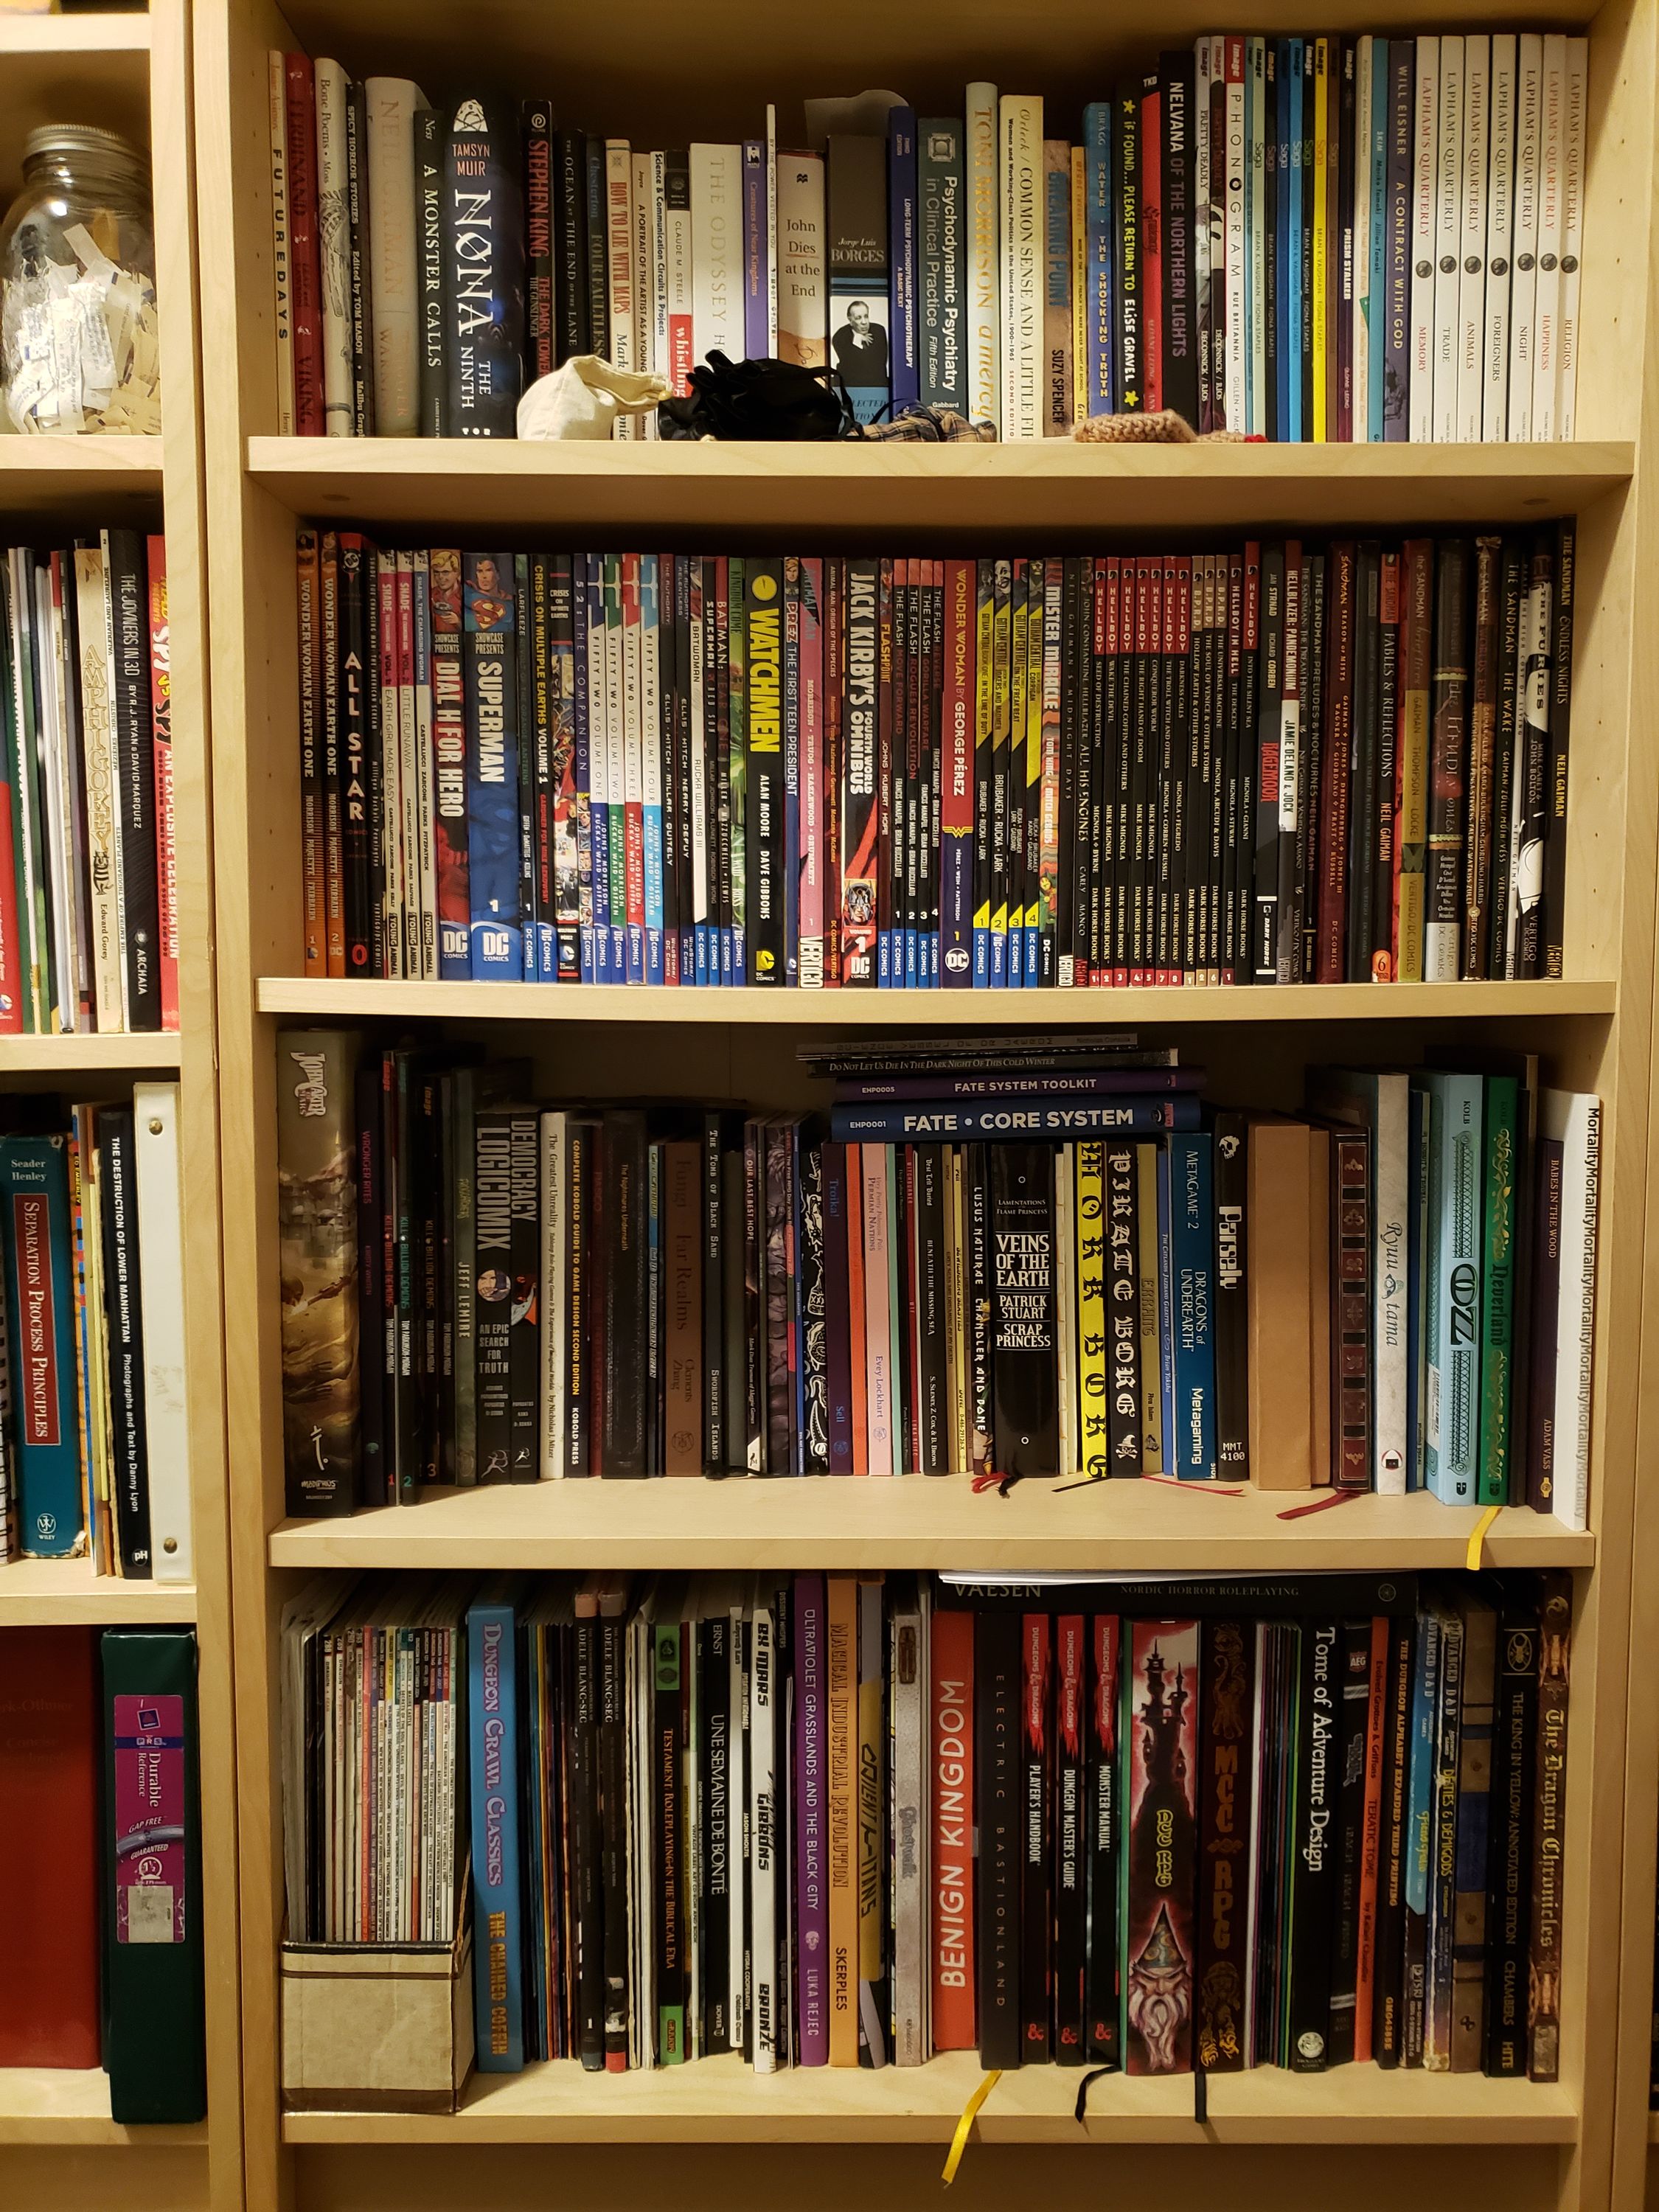 A close-up of the bottom four shelves of the third-from-the-right case in the earlier photograph. The top shelf is miscellaneous, the shelf below it is graphic novels, and the two bottom shelves are mostly RPG books, with the taller books on the bottom shelf.